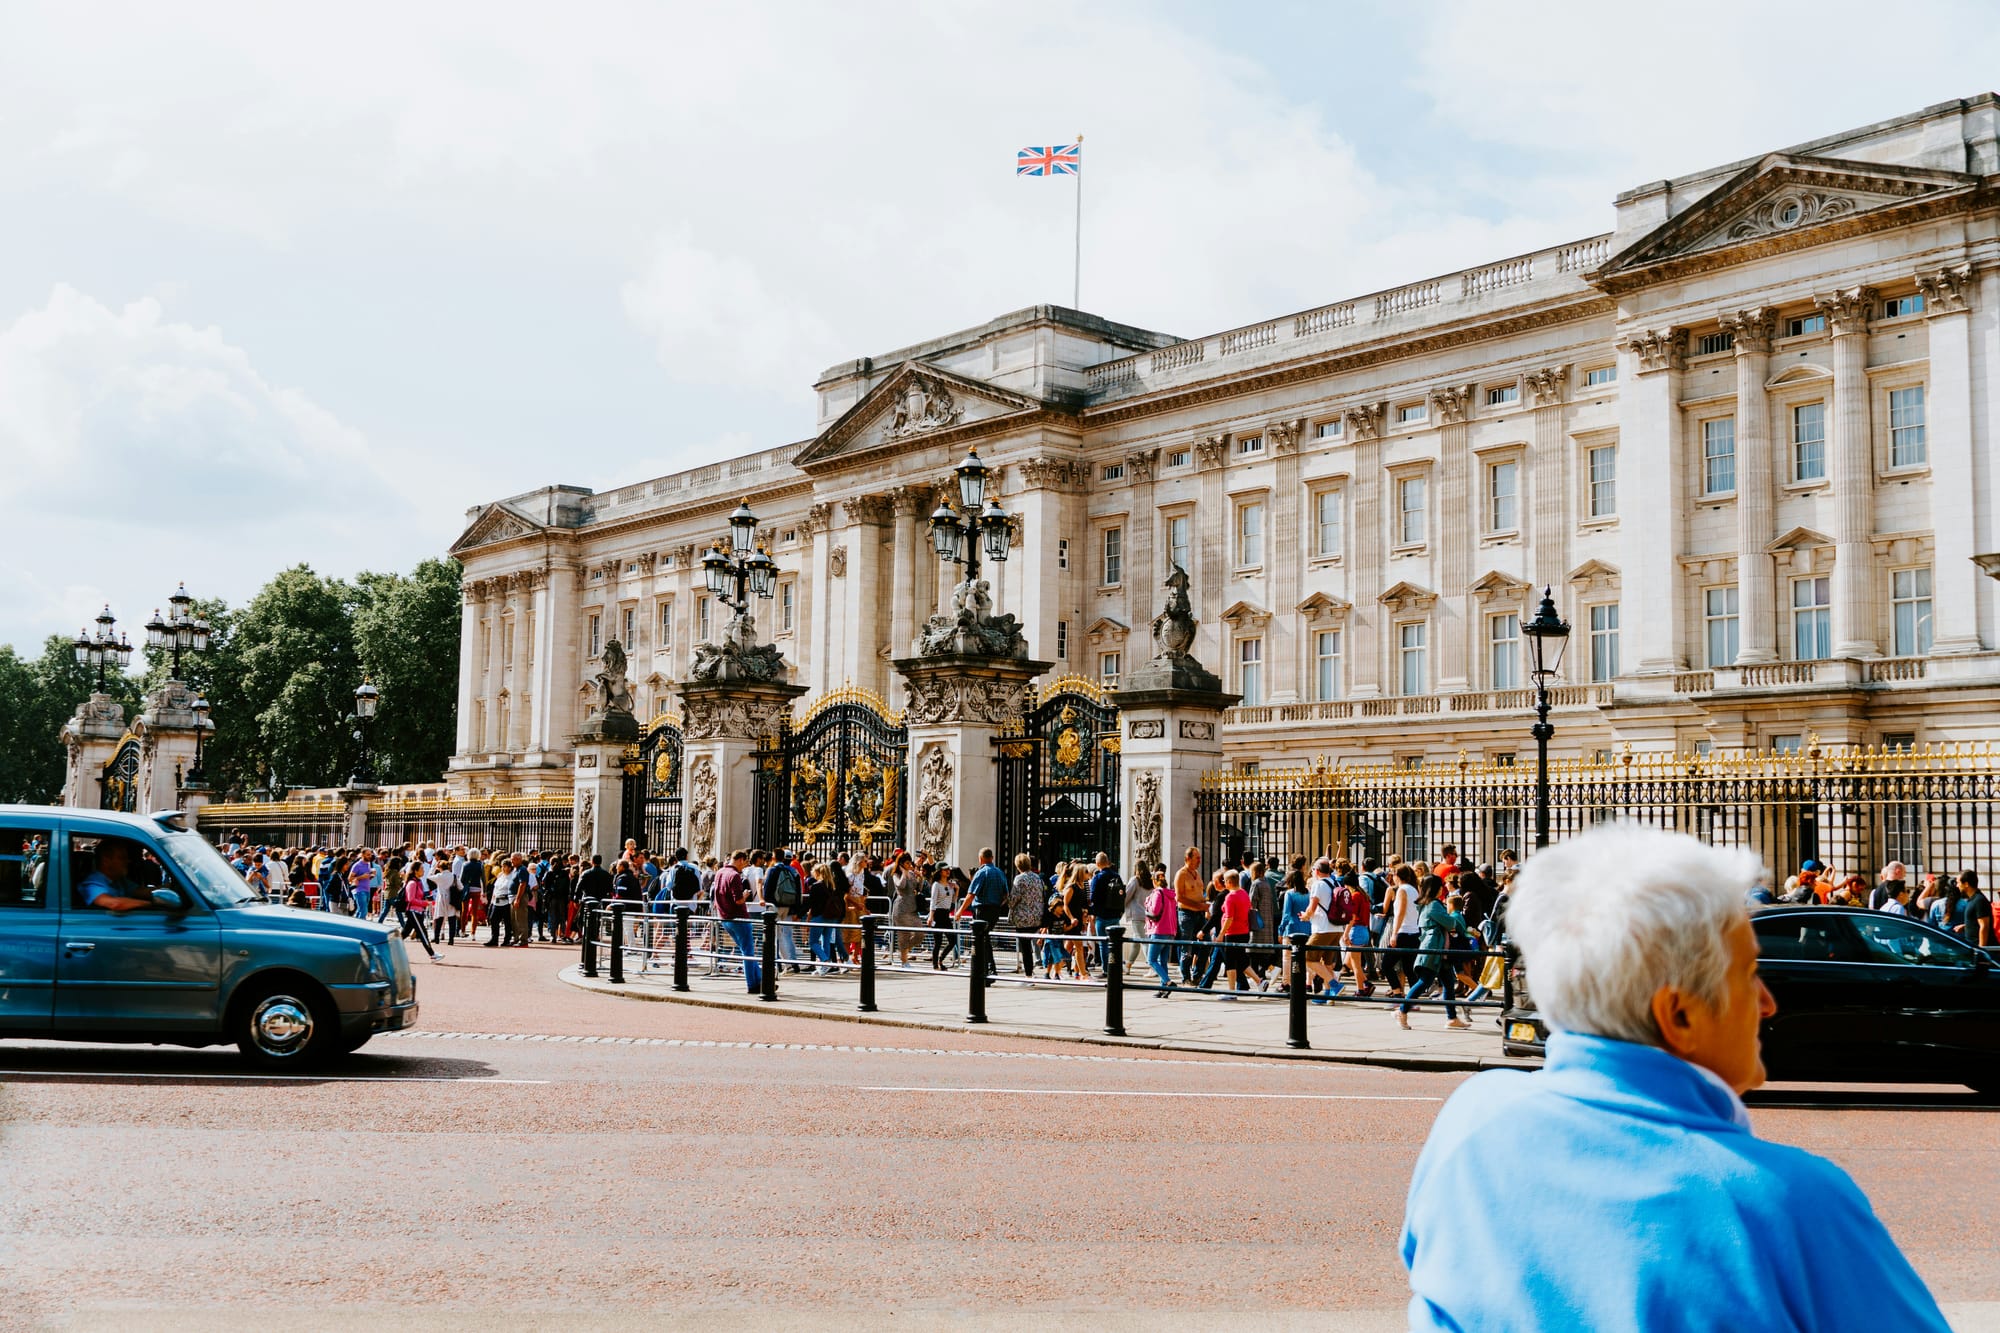 Buckingham Palace in London, UK is one of the top accessible attractions in the city